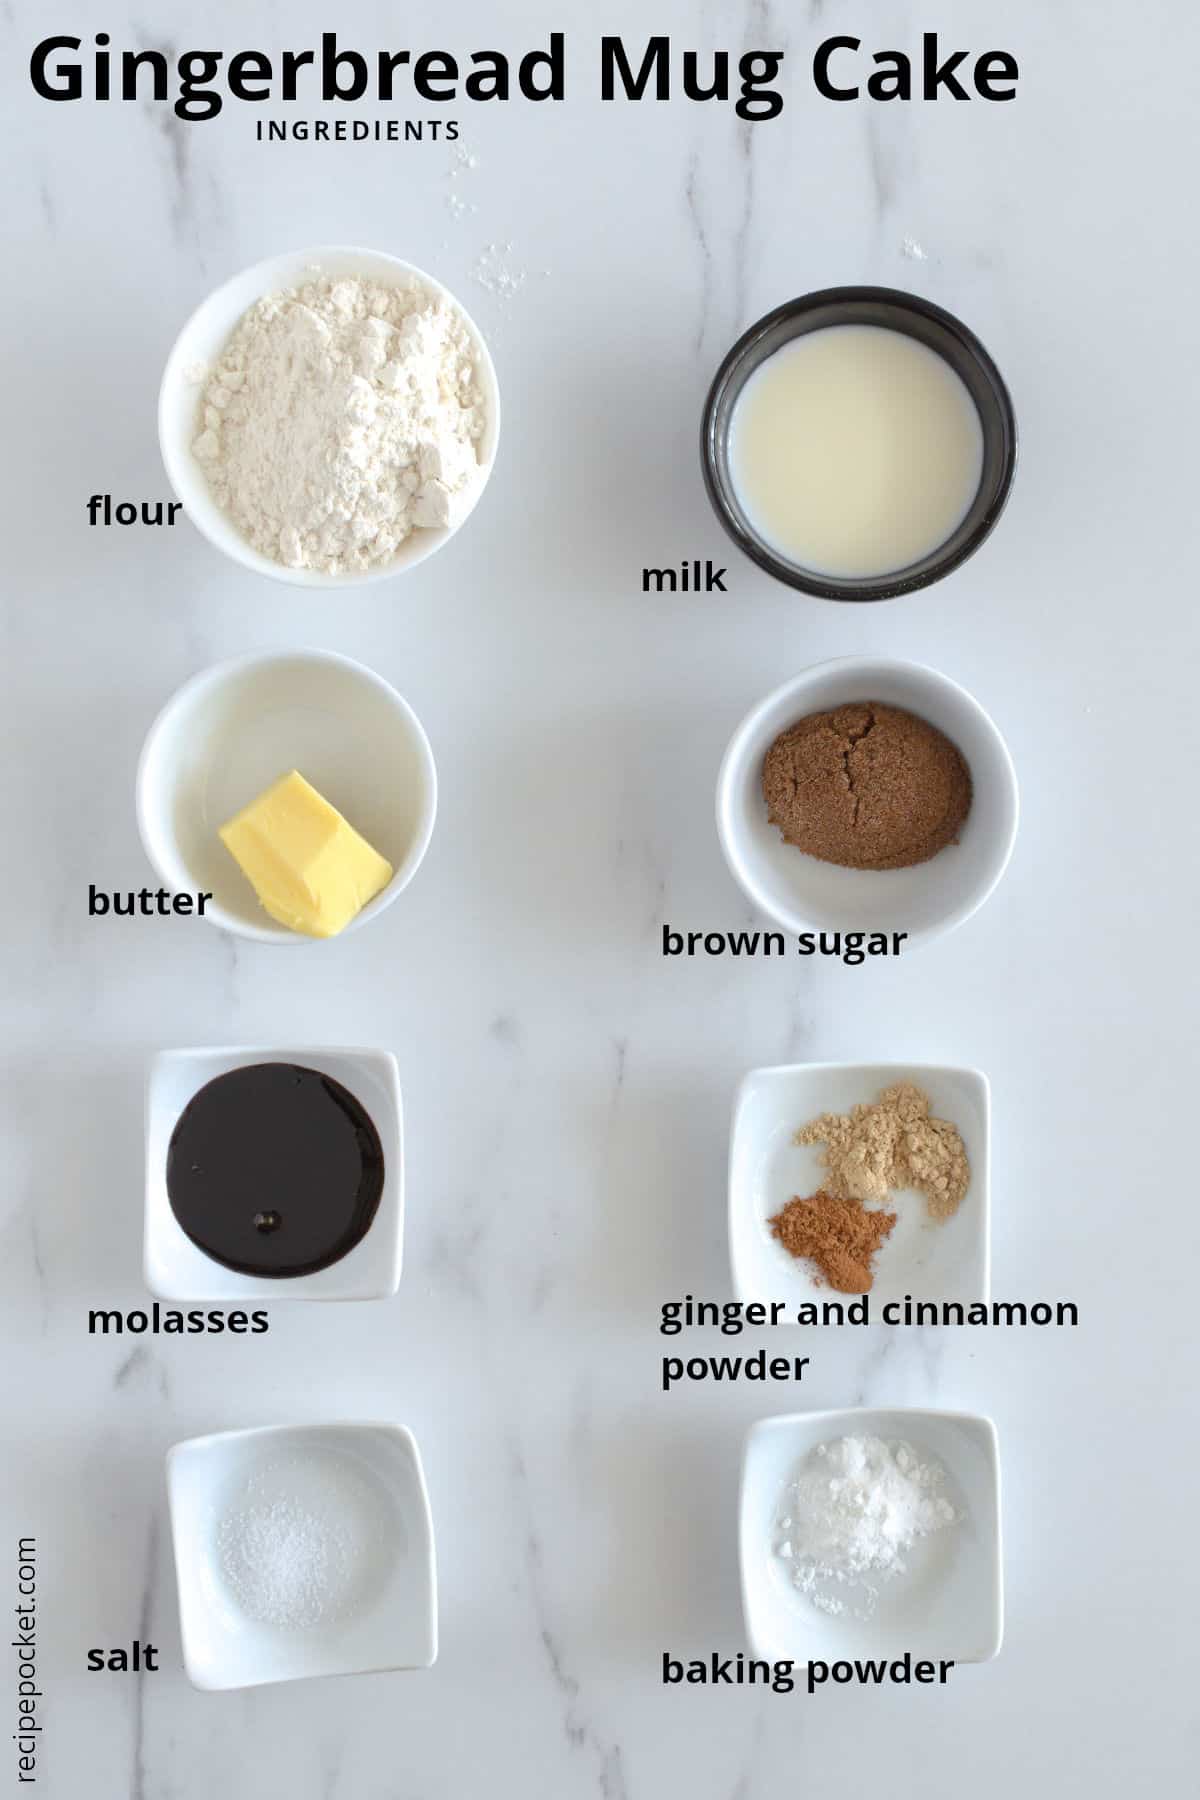 Image showing the ingredients needed to make a ginger bread mug cake.